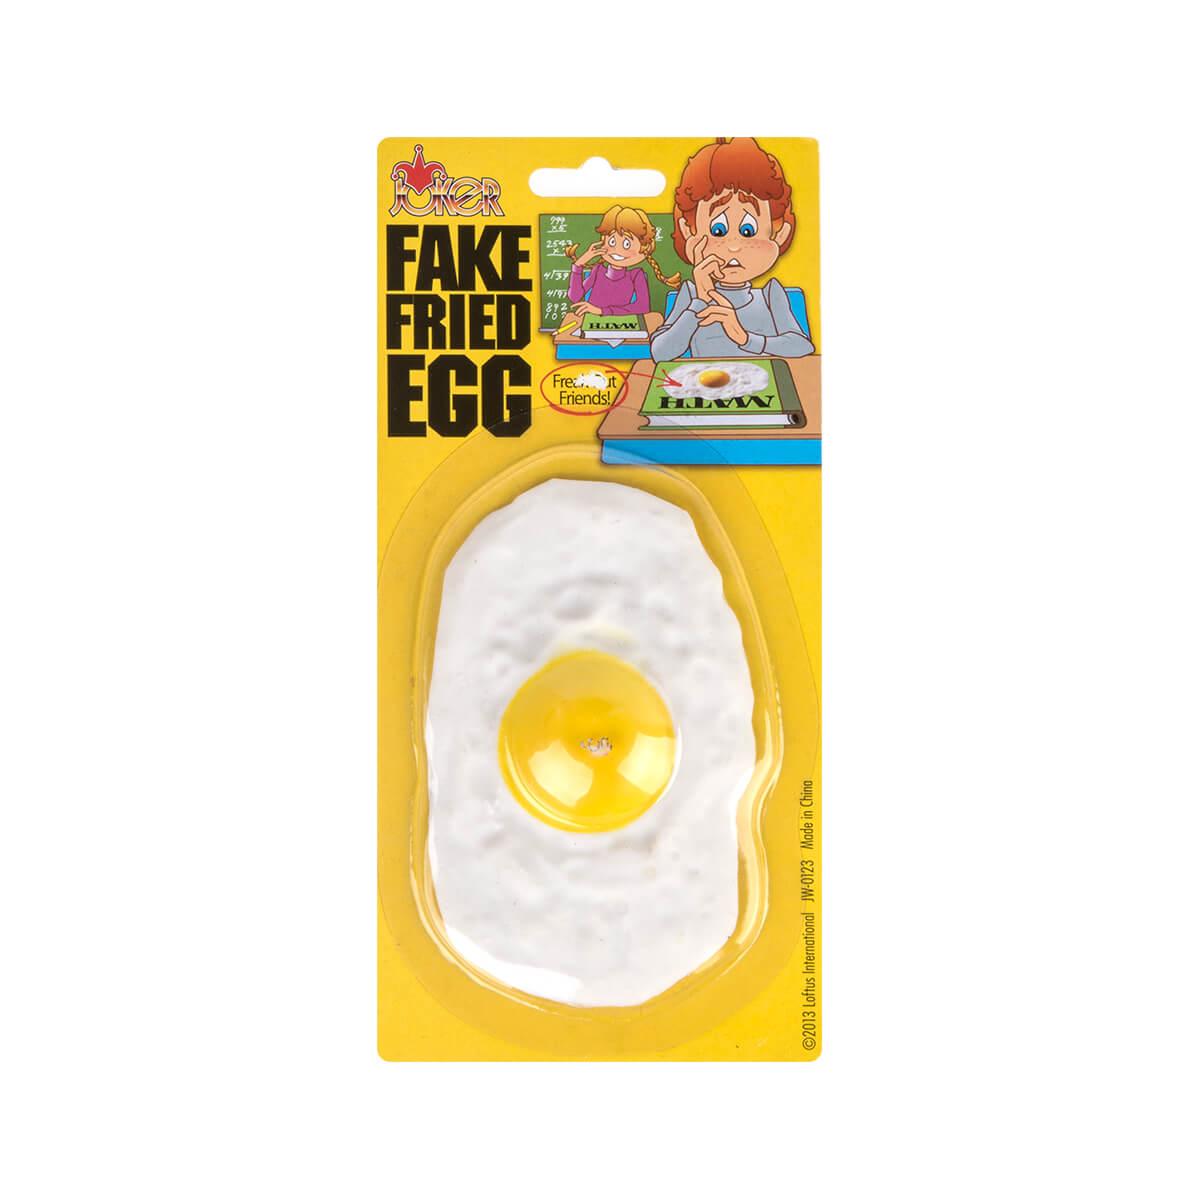  Fake Fried Egg Trick Toy